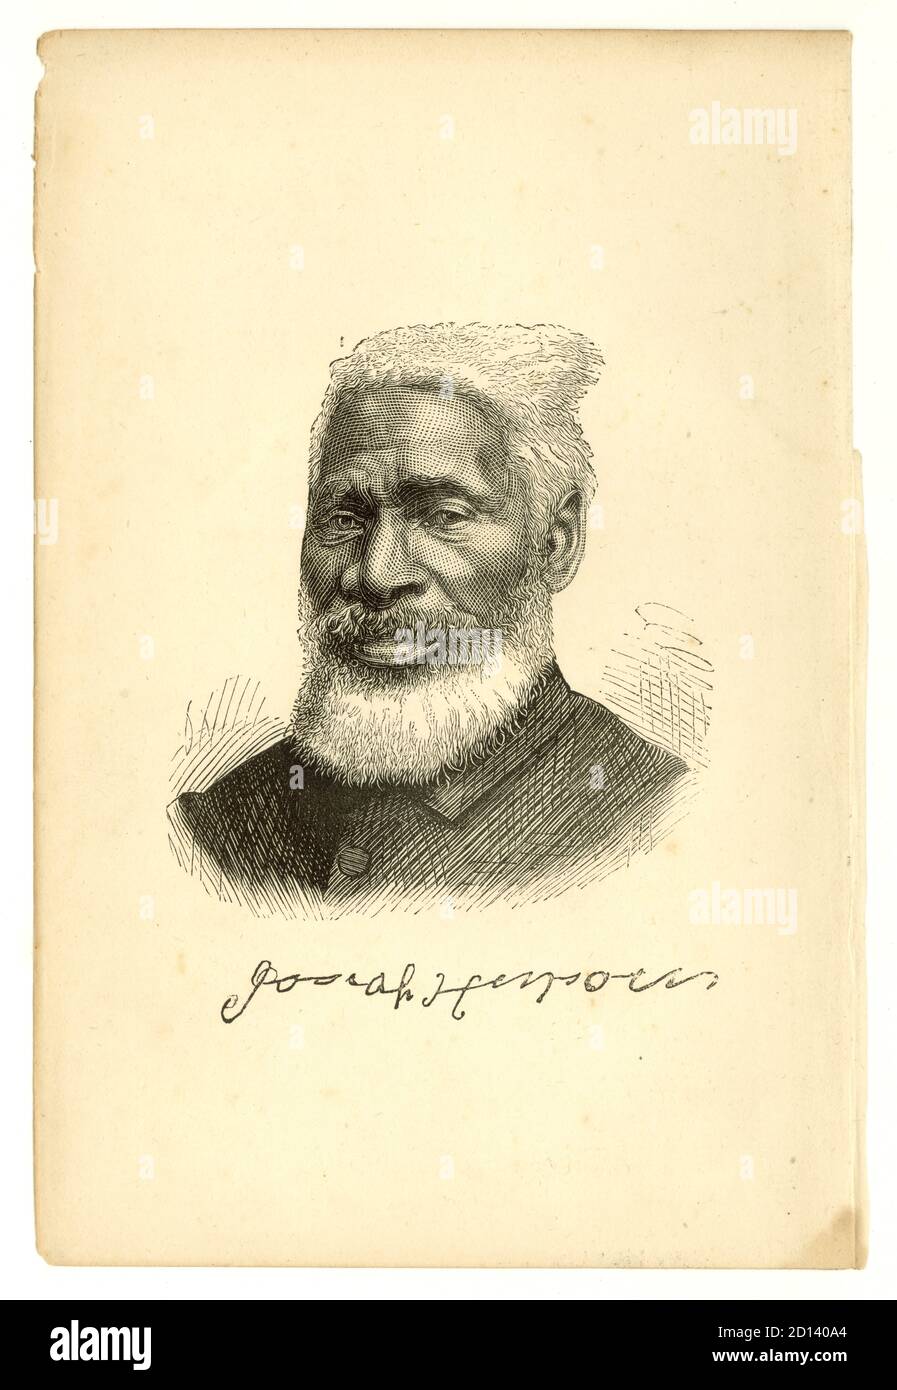 Book plate of Reverend Josiah Henson taken from the book Uncle Toms - a short story of his life edited by John Lobb. This illustration is taken from the book which is dated 1877, the drawing was copied from a photograph of Josiah by the studios of Bradshaw & Godart, (successors to the London School of Photography), 103, Newgate Street, E.C., London U.K. Stock Photo